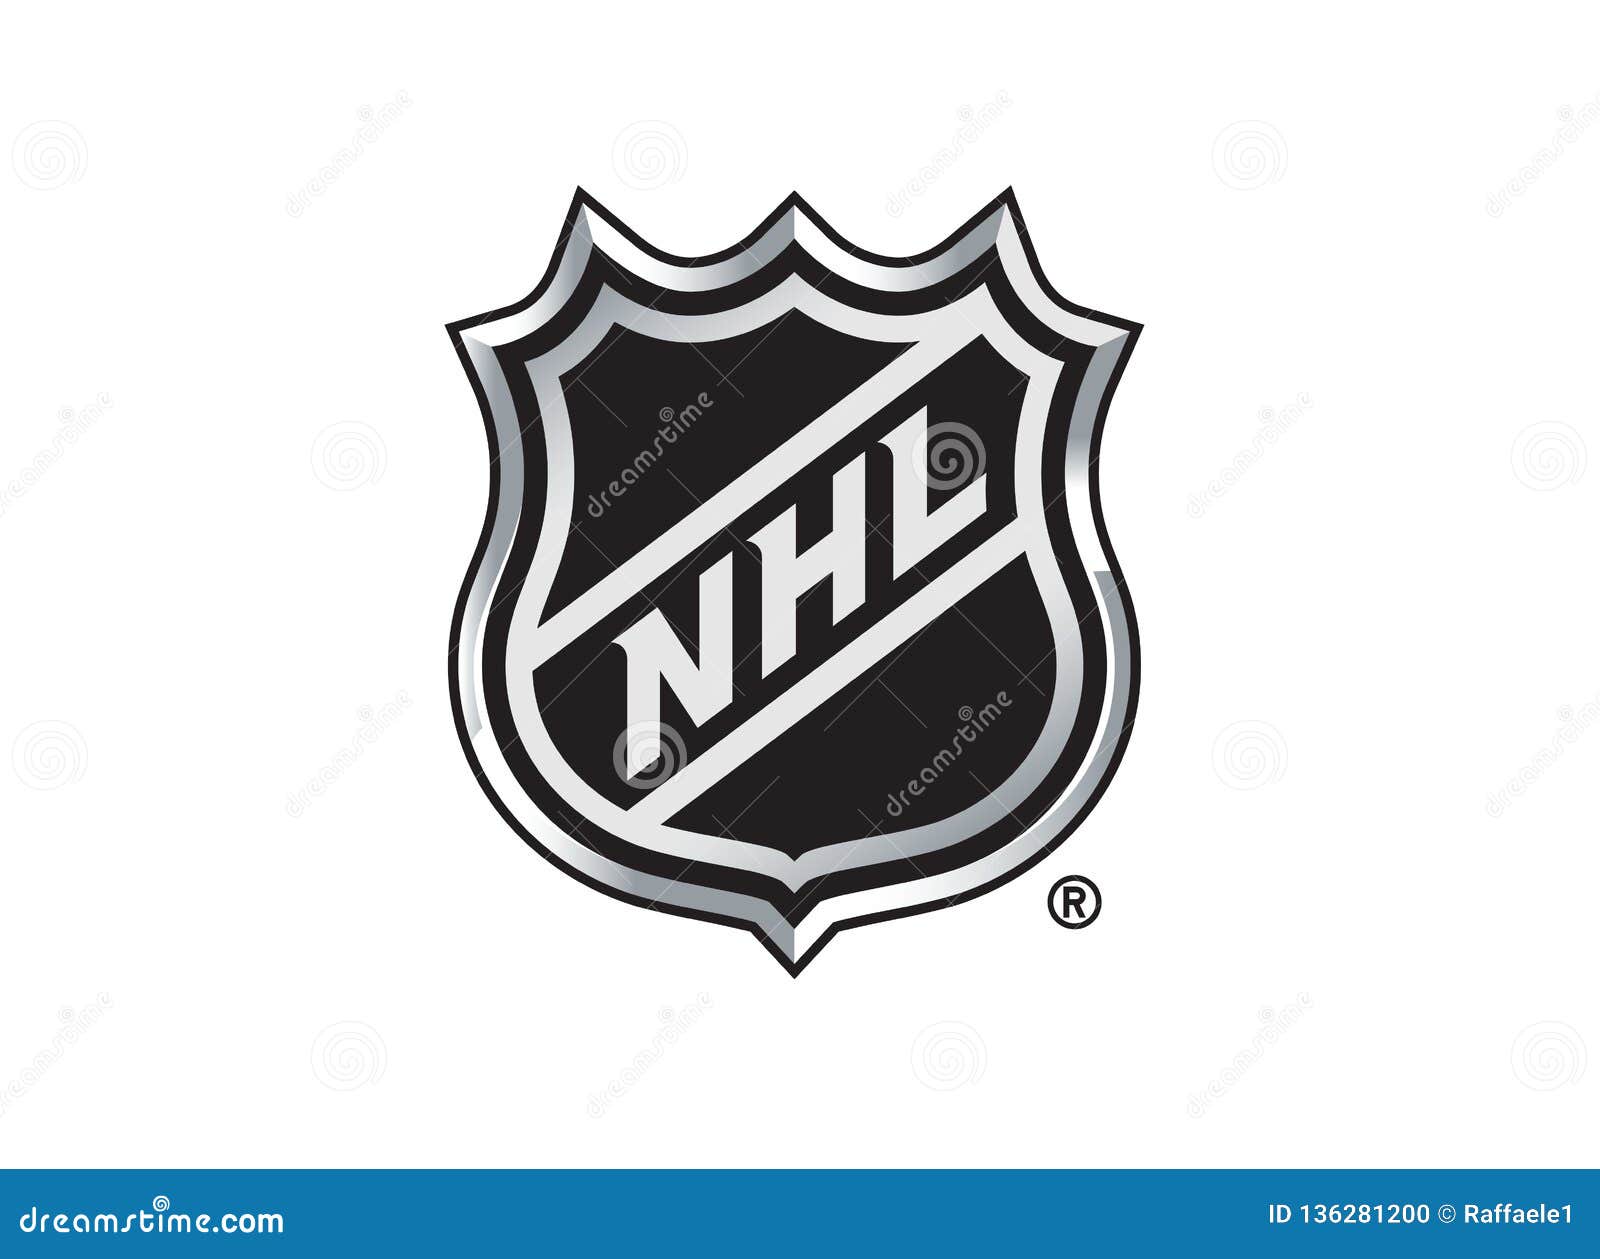 Nhl Logo Vector Art, Icons, and Graphics for Free Download